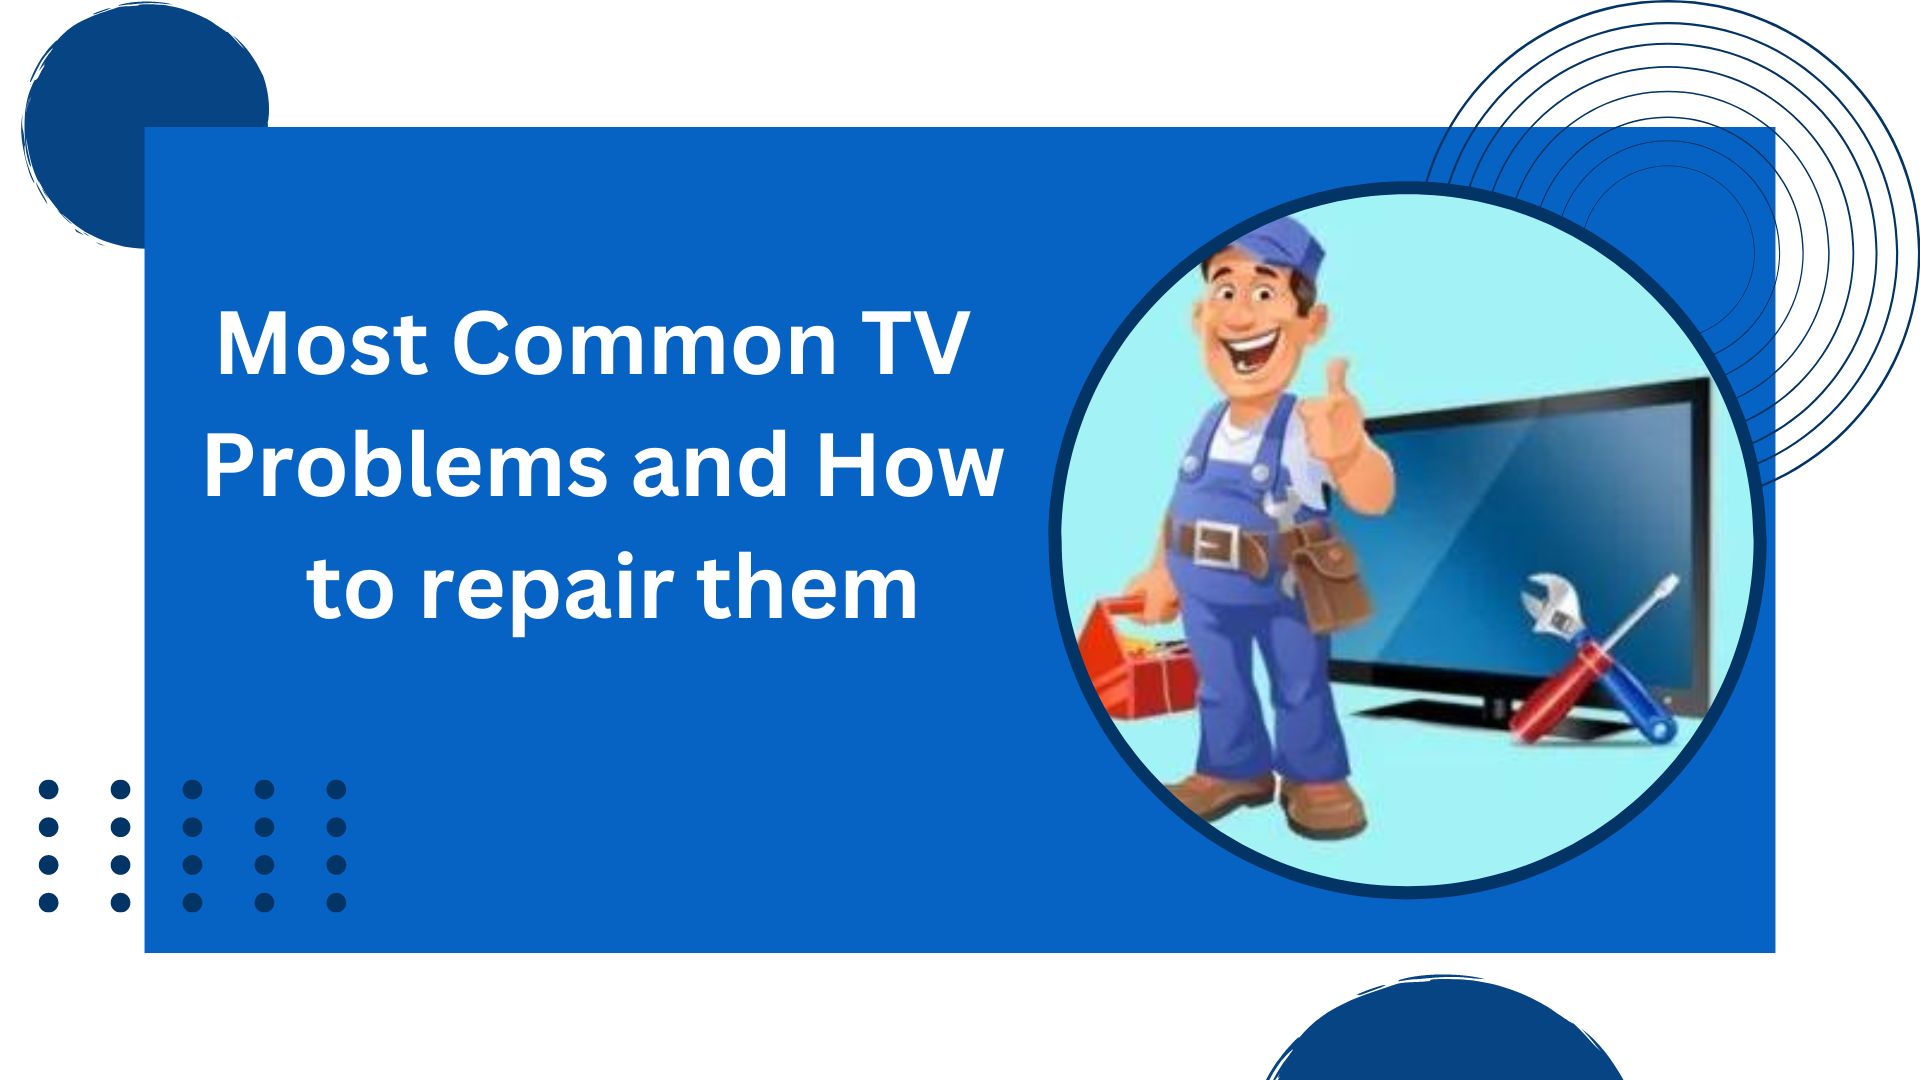 Most Common TV Problems and How to repair them